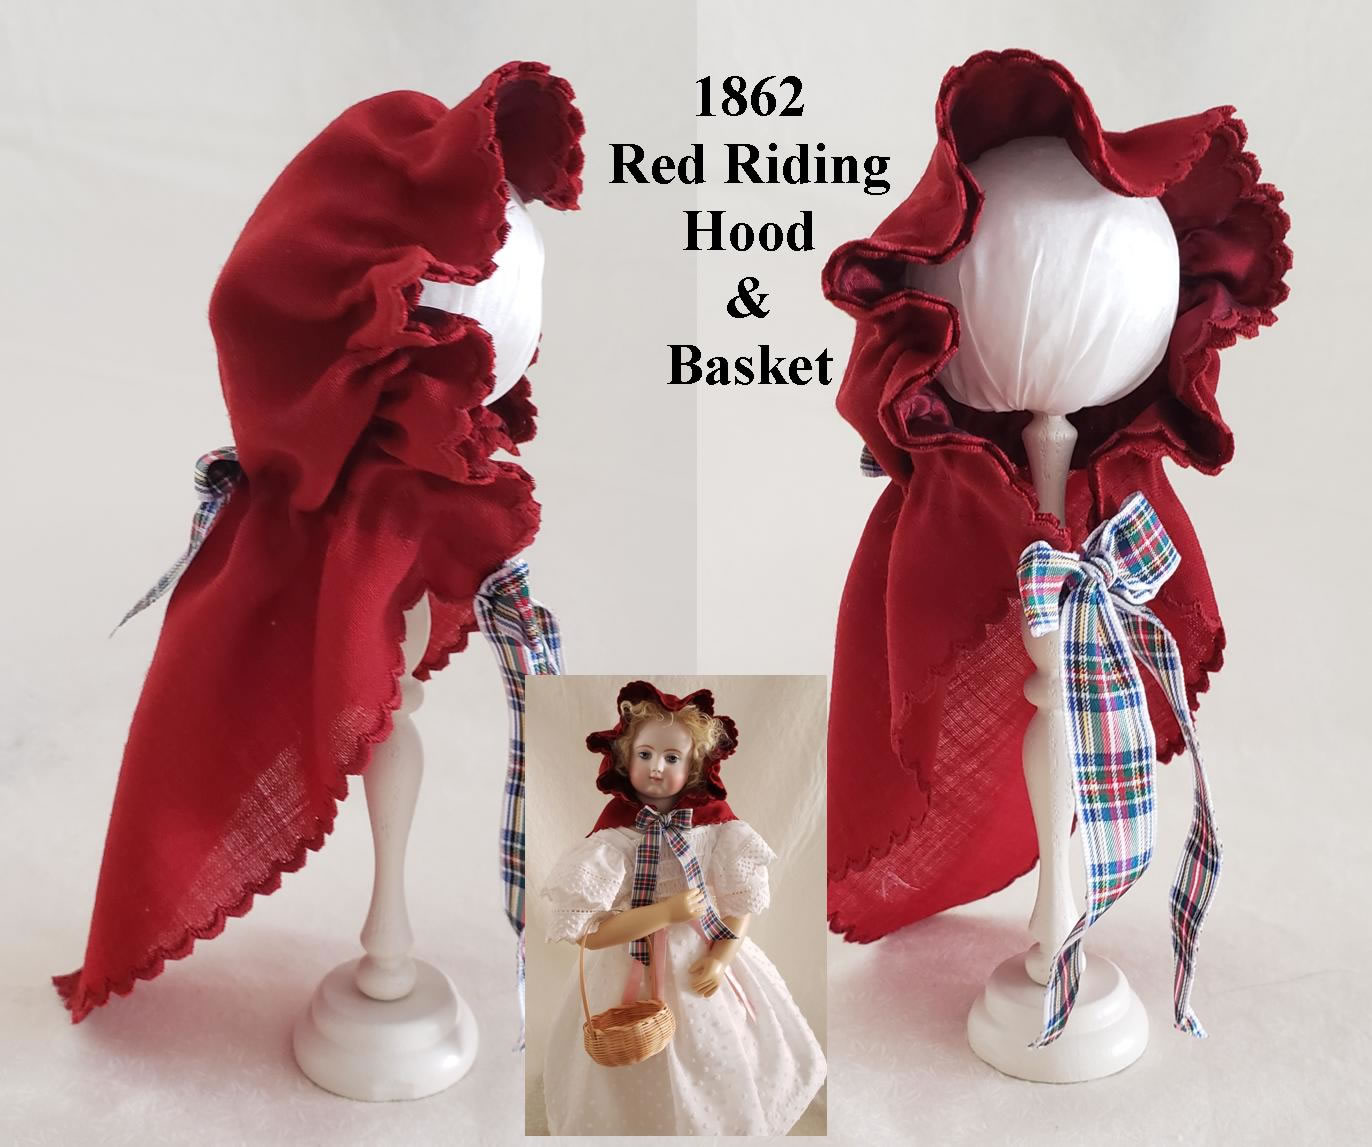 1862 Red Riding Hood & Basket   •   Tuesday, August 2nd, 9:00 am